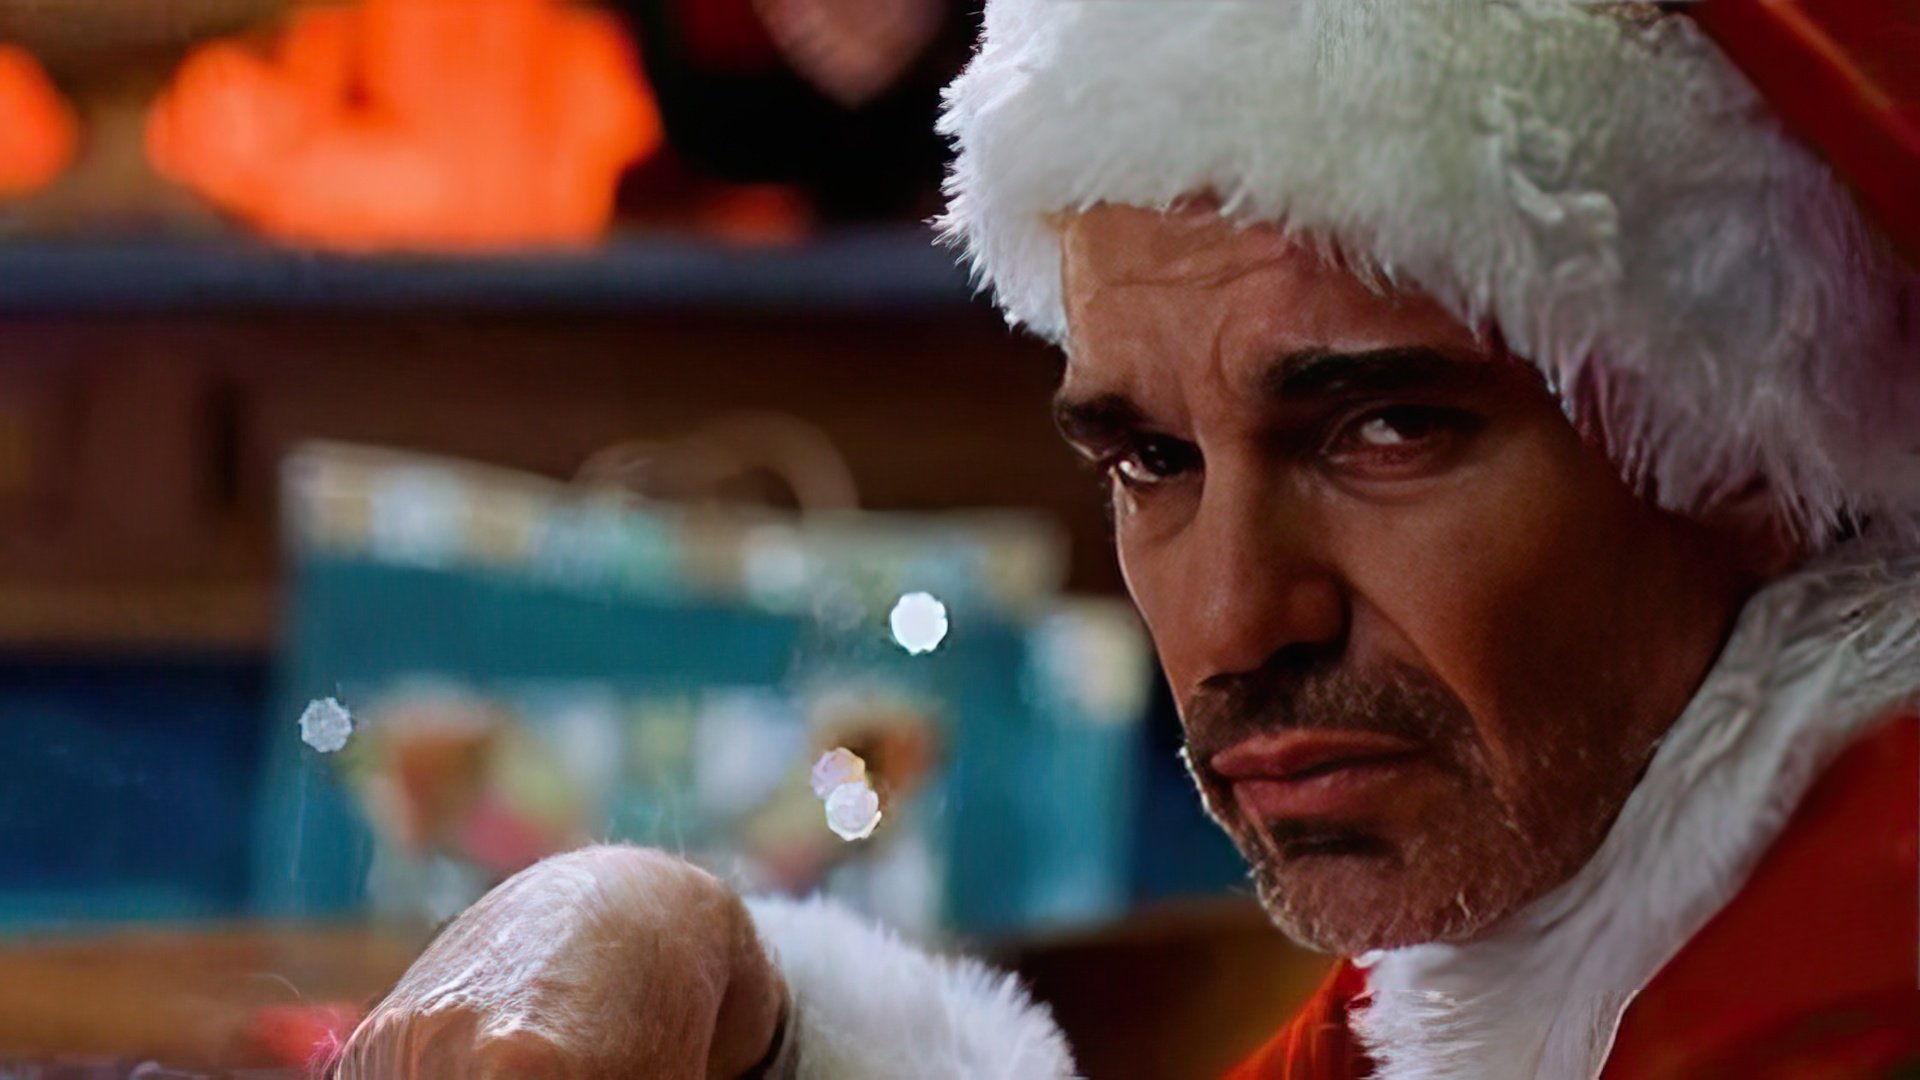 A Frame from the Film Bad Santa 2